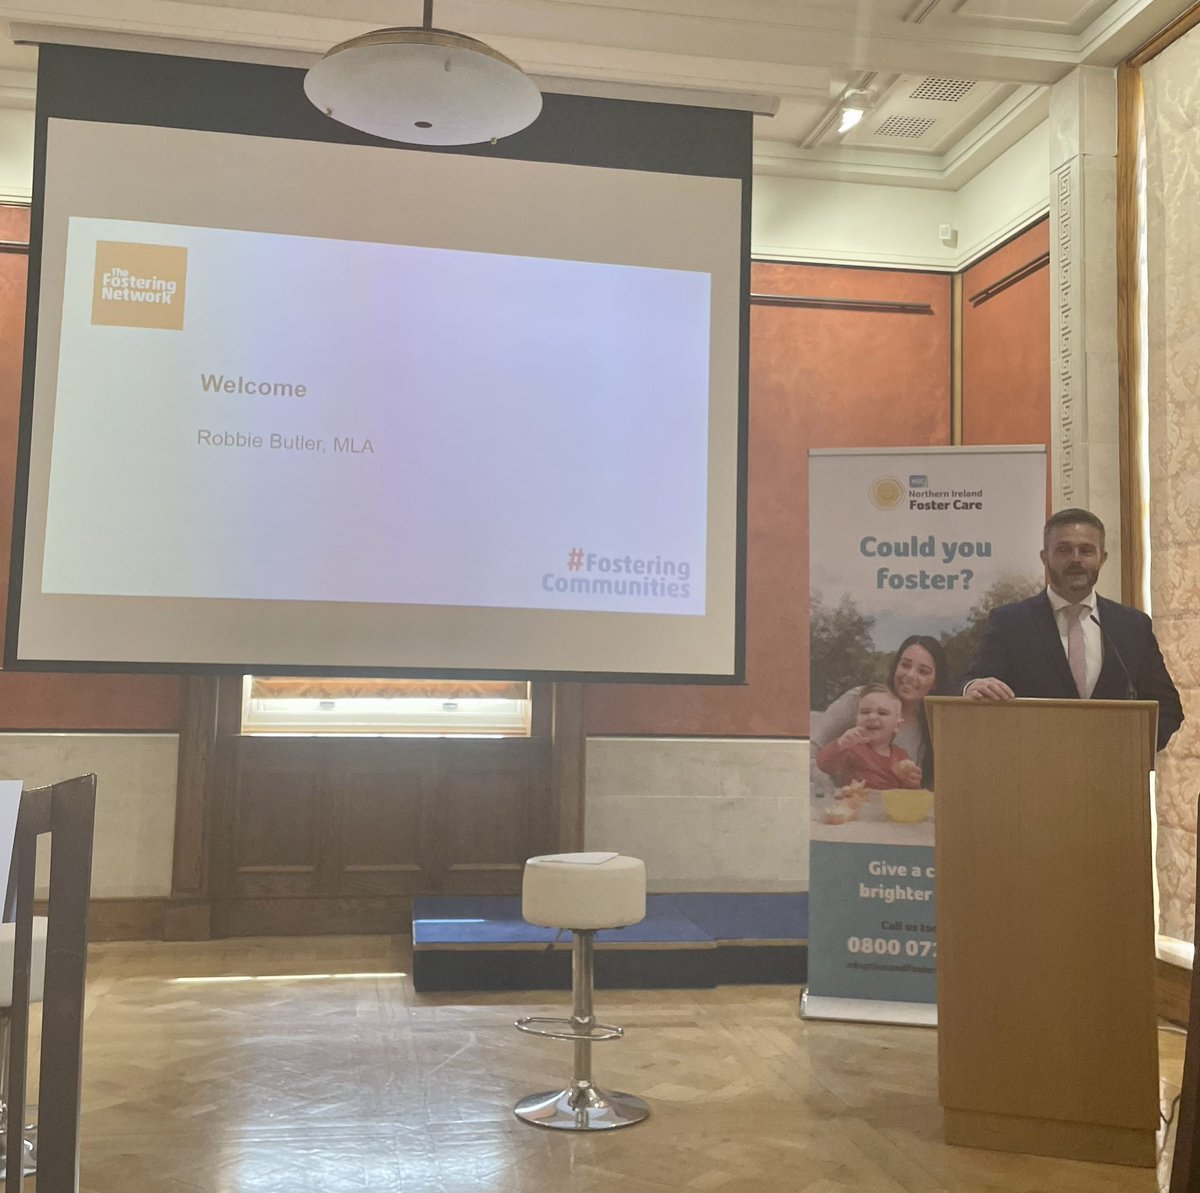 @RobbieButlerMLA opens @fosteringnet’s #FCF23 launch at Stormont, parliament buildings. Robbie references 6% increase of young people entering care in NI & the big need for more foster carers. Fostering has been a significant part of his life.
#FosteringCommunities
@tfn_kathleen